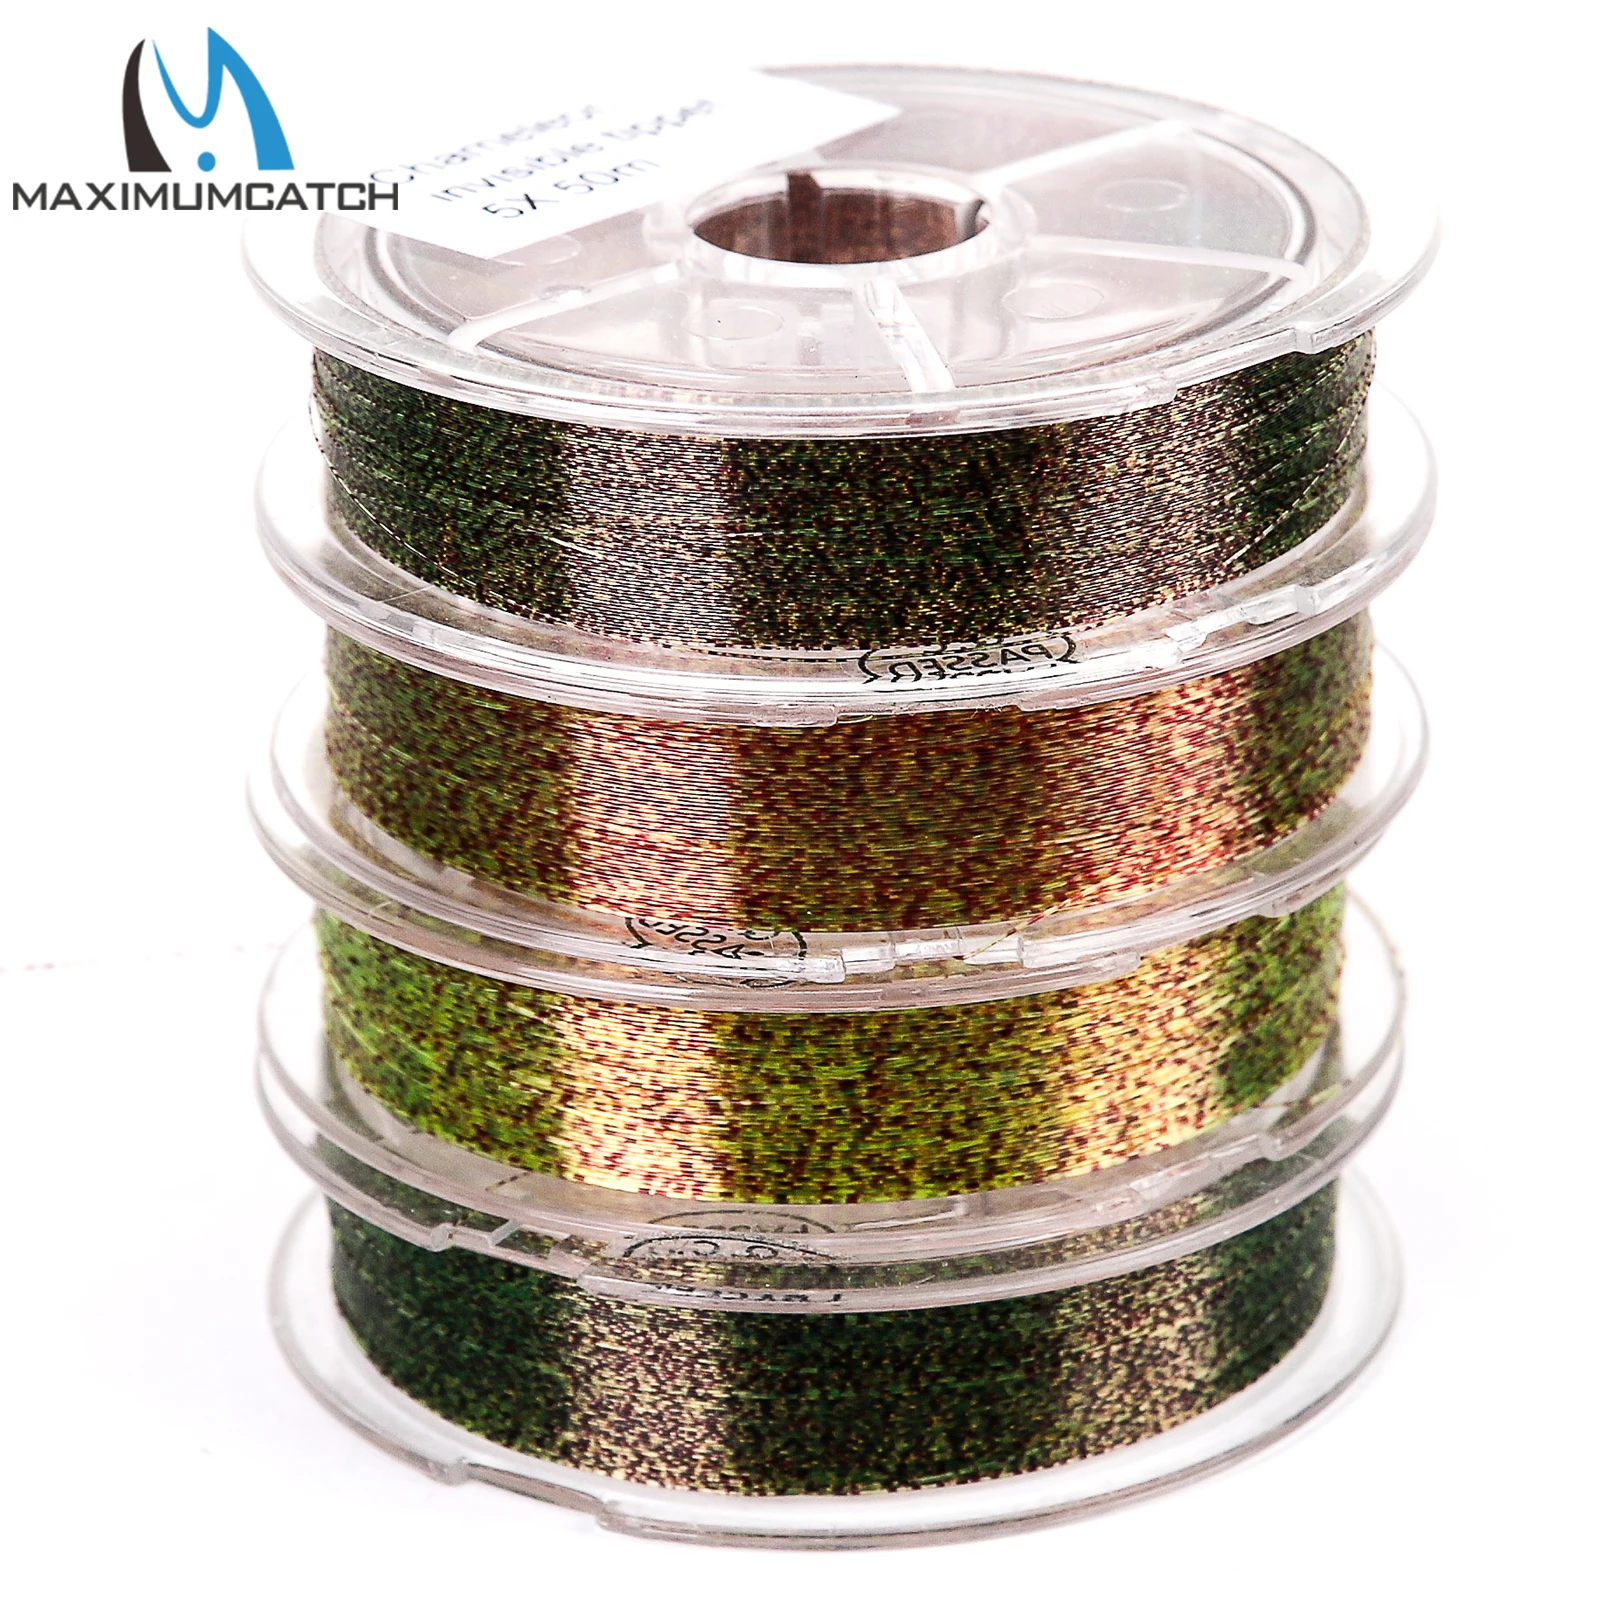 Maximumcatch Chameleon Invisible Tippet Fly Fishing Line 50M 2X/3X/4X/5X  Fly Line